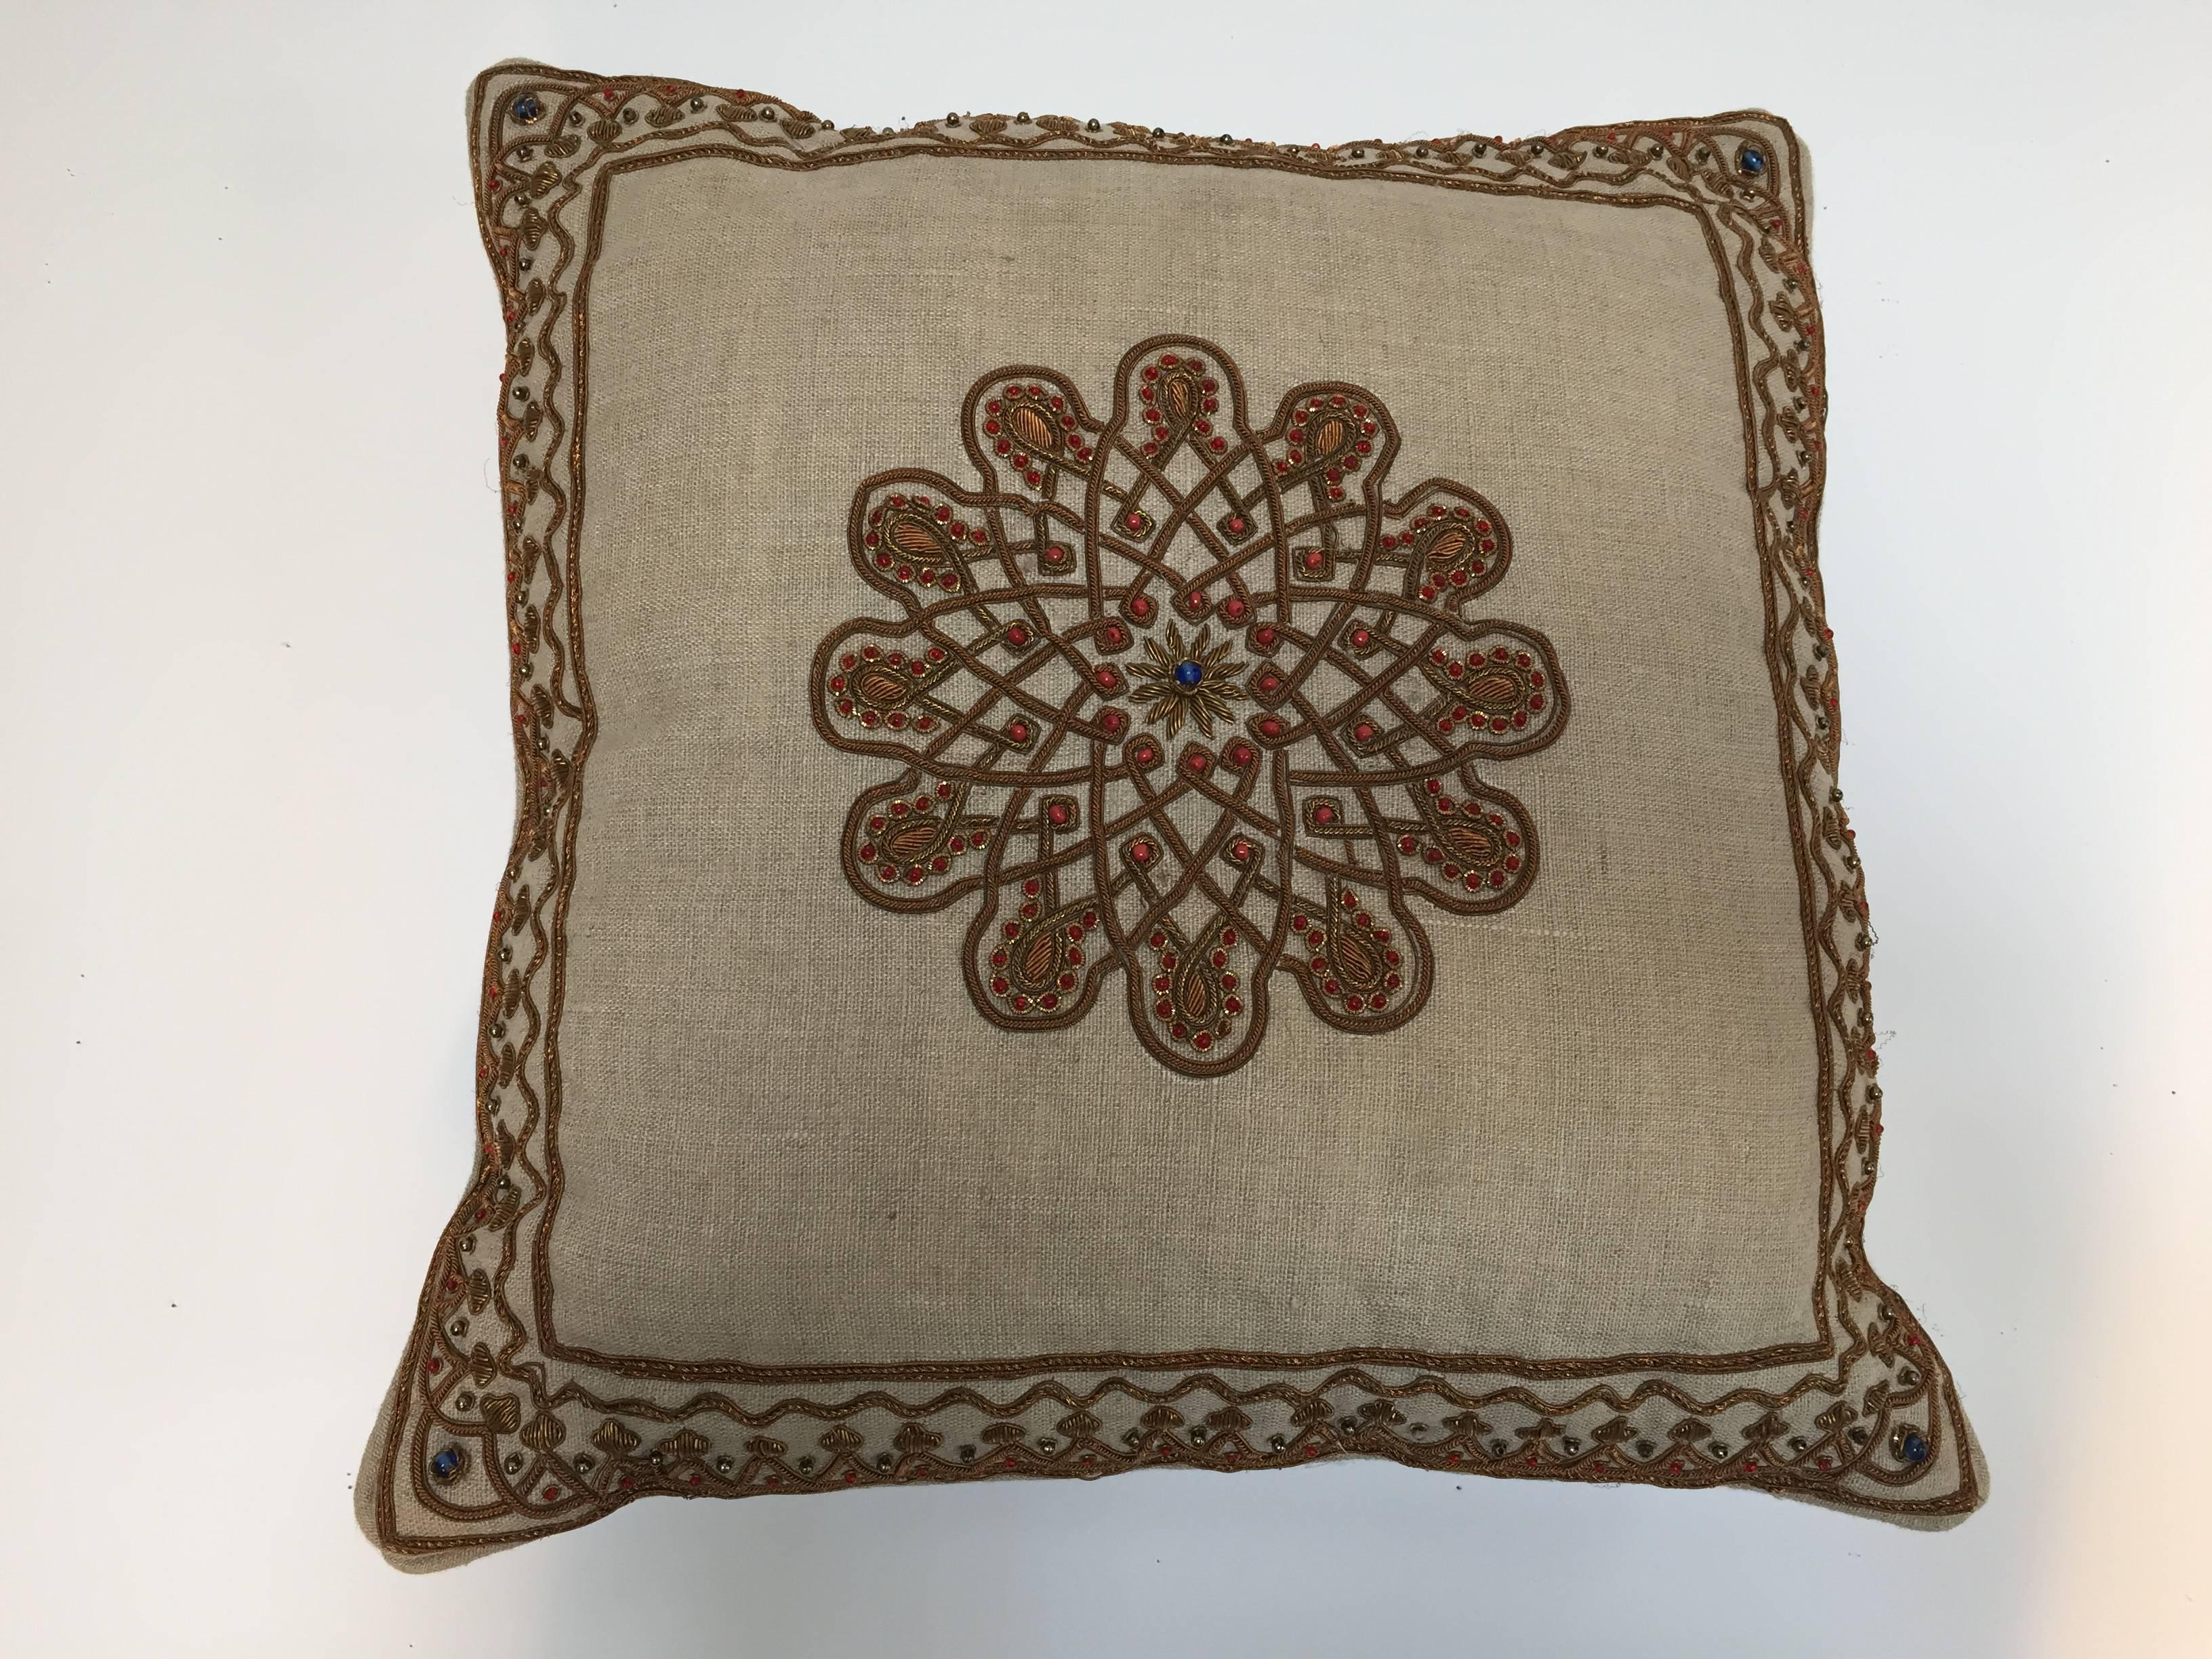 Throw decorative accent pillow embroidered with Moorish metallic threads embroidery on tan color linen.
Handcrafted pillow embellished with Turkish metallic threads embroidered onto linen and embellished with red beads.
Down inserts.